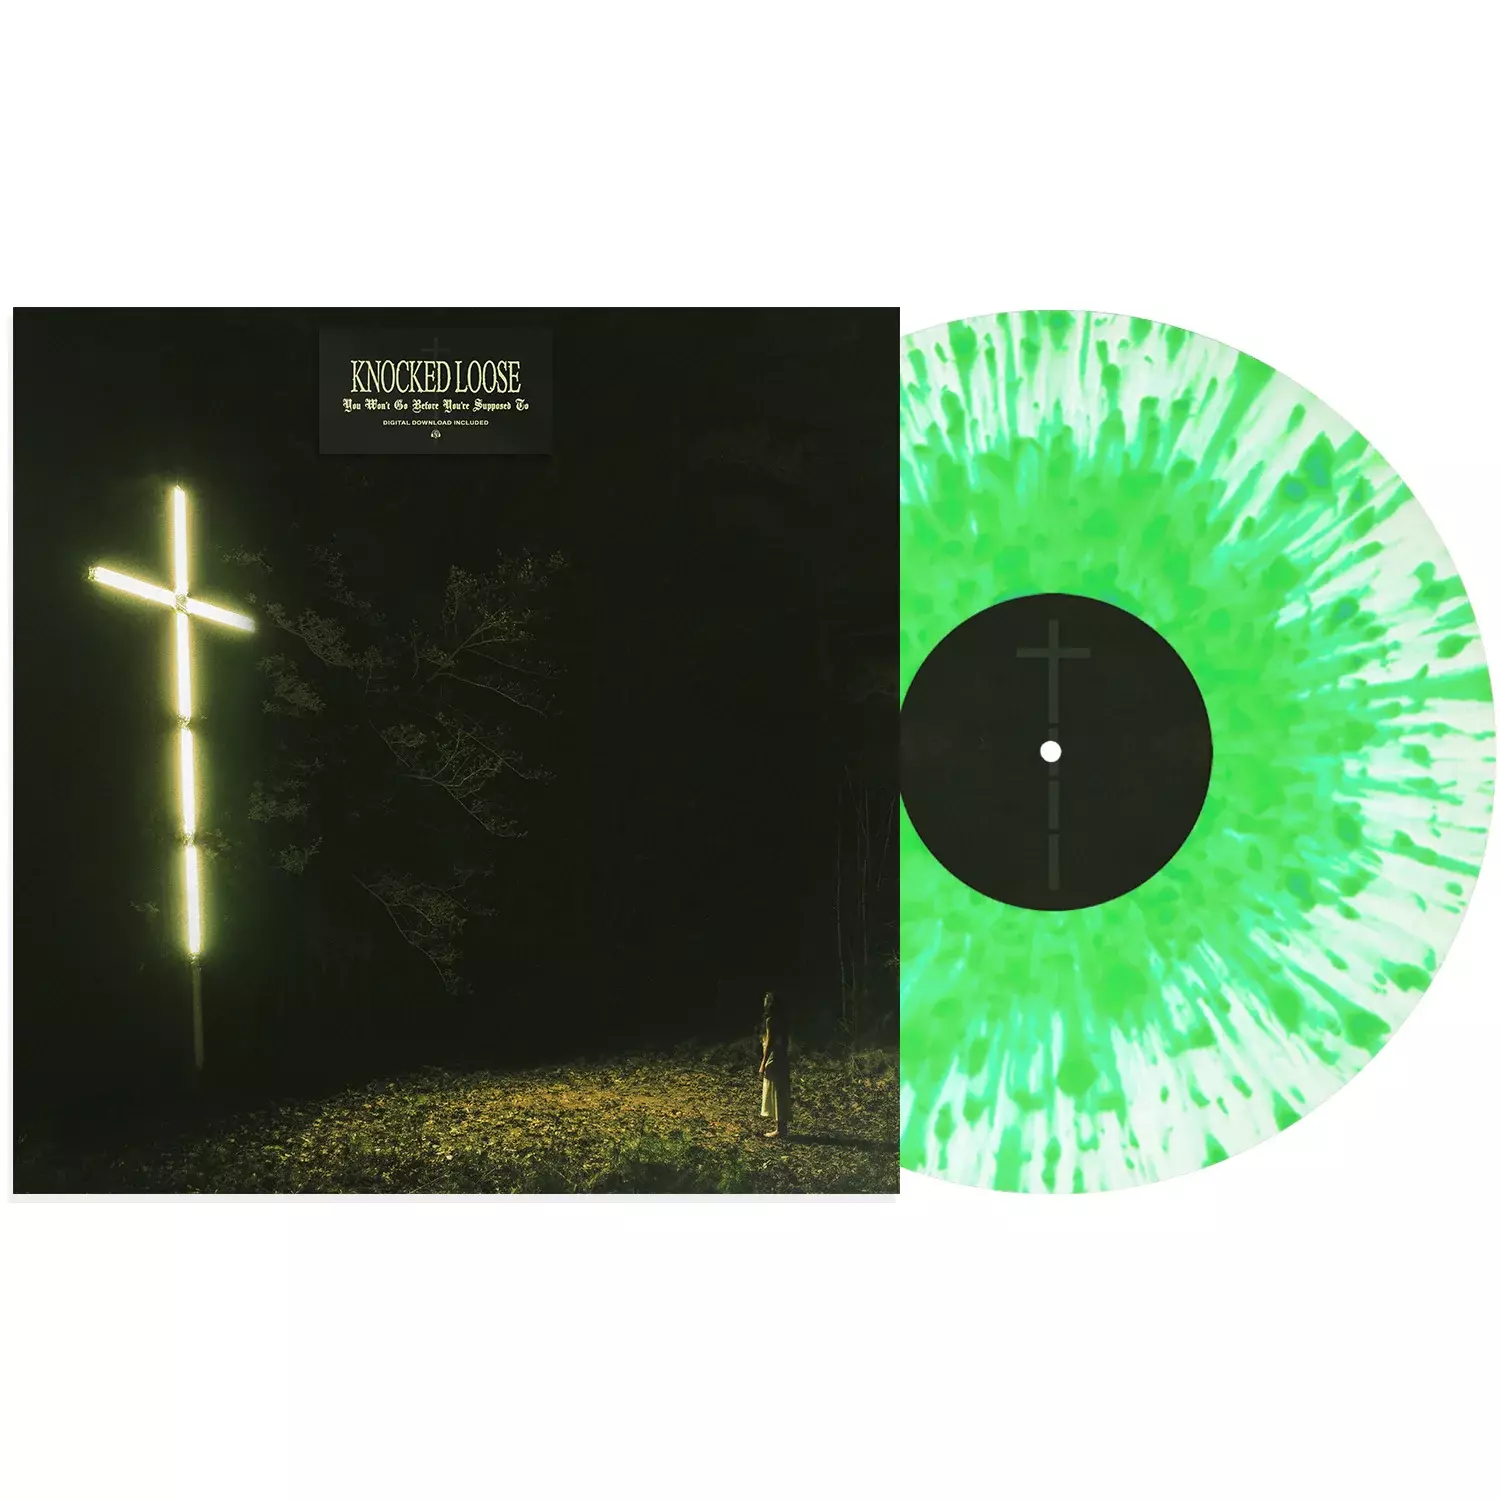 KNOCKED LOOSE - You Won't Go Before You're Supposed To [CLEAR/MINT SPLATTER LP]